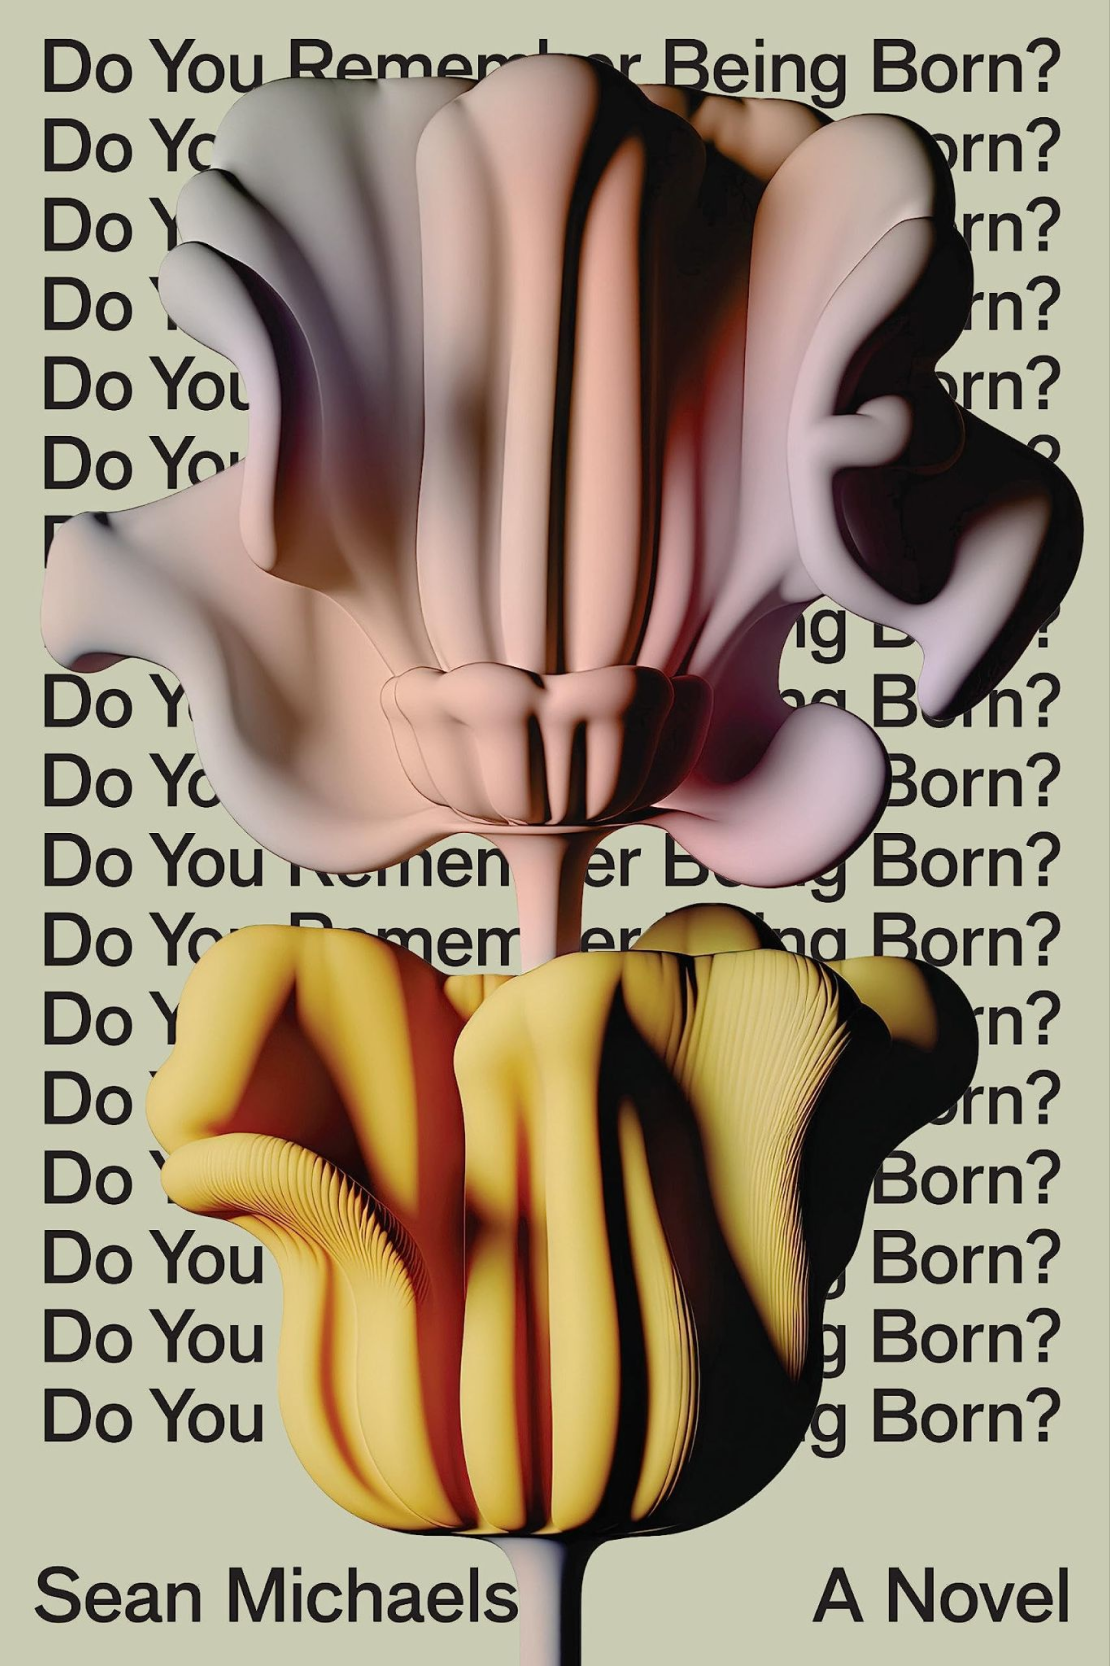 Do You Remember Being Born? by Sean Michaels Image